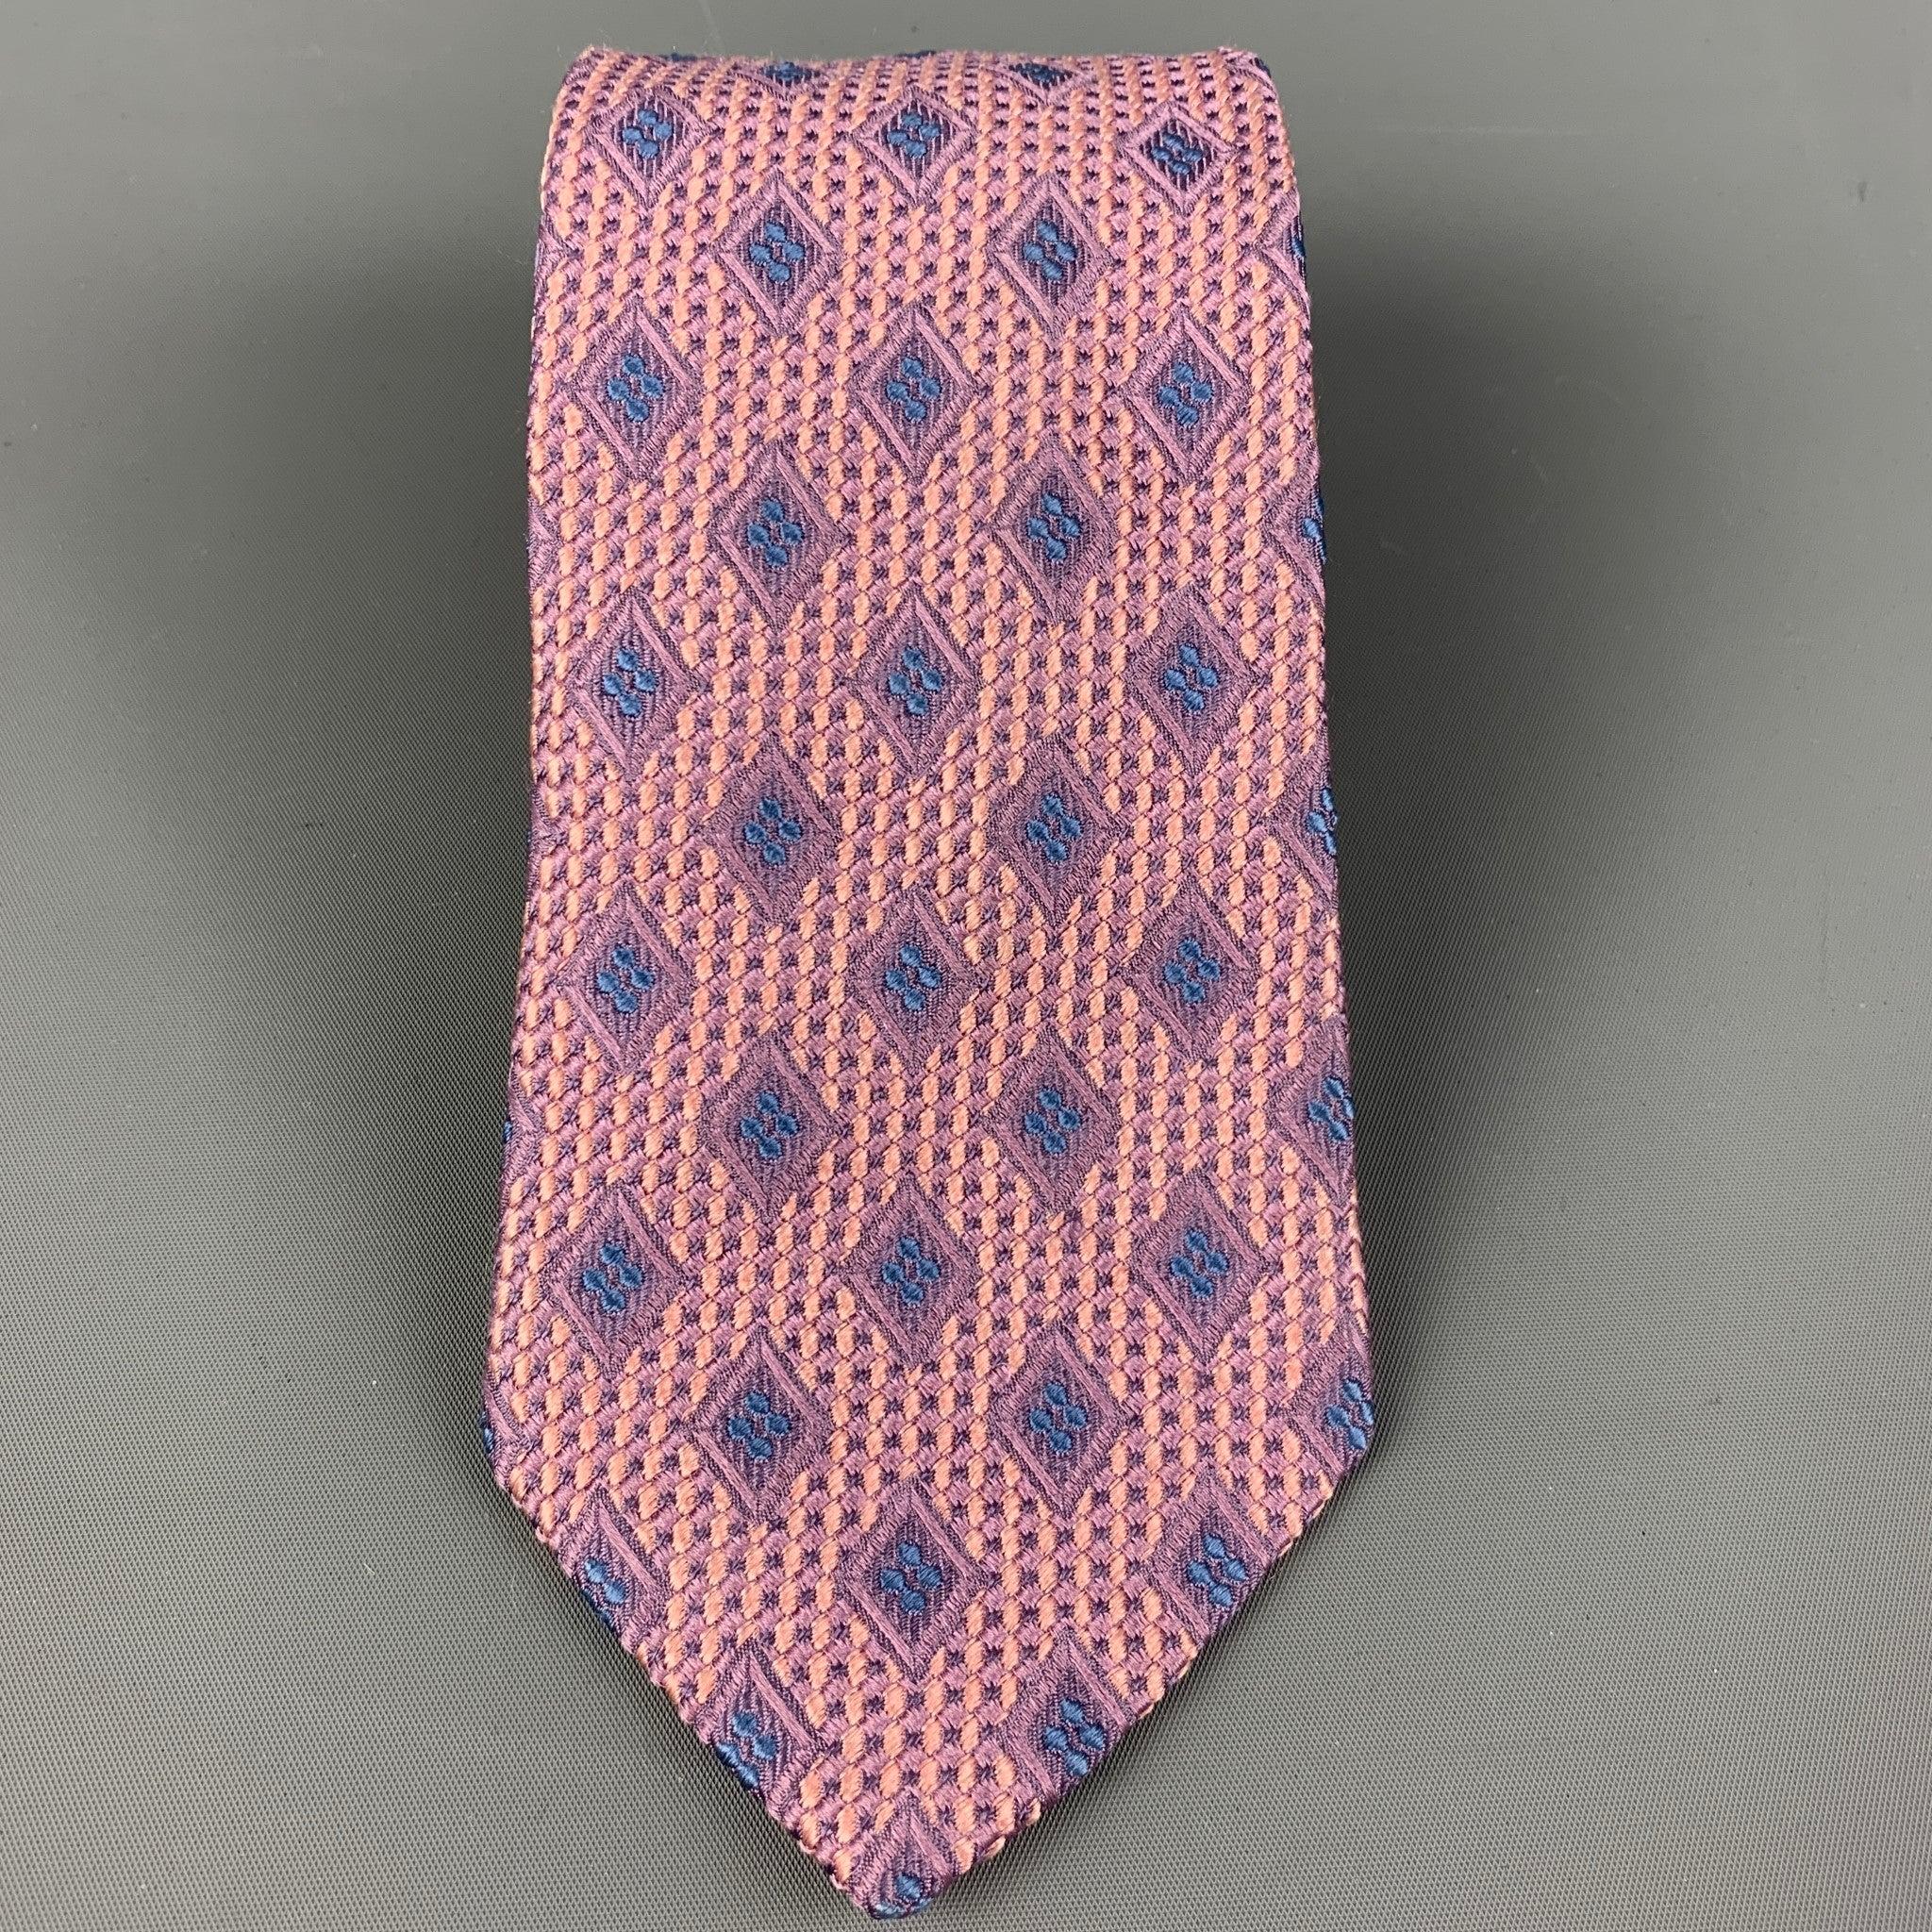 ERMENEGILDO ZEGNA necktie comes in a silk and cotton blend featuring a diamond pattern of purple and blue. Made in Italy.
Good Pre-Owned Condition. 

Measurements: 
  Width: 3.5 inches Length: 58 inches 
  
  
 
Reference: 124775
Category: Tie
More